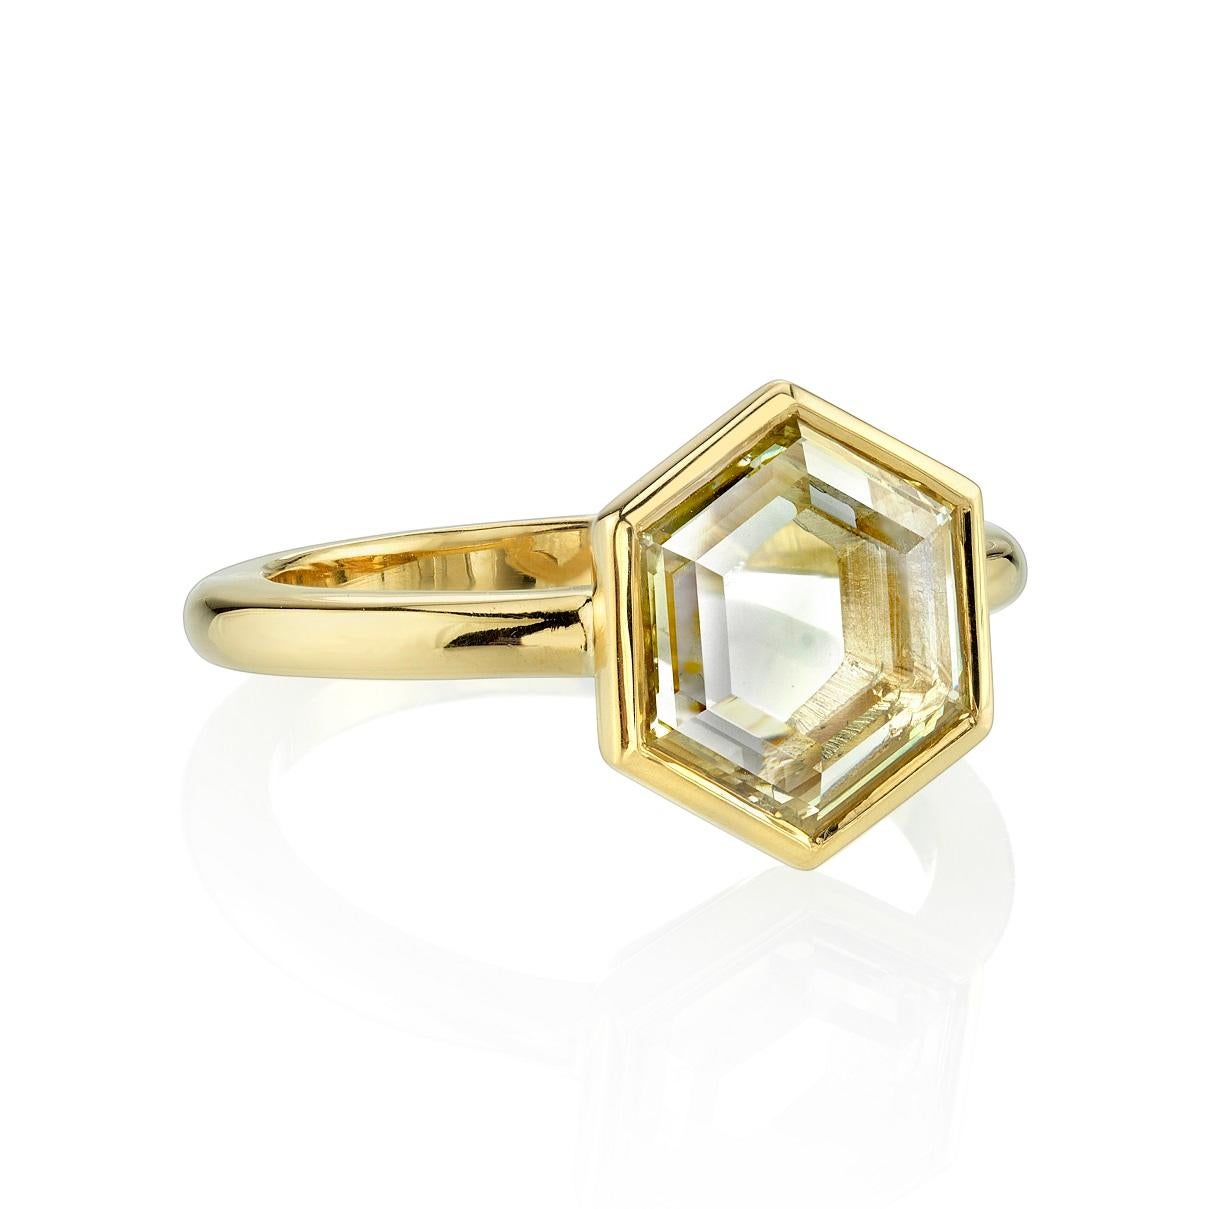 1.44ct Light Yellow/ VS2 GIA certified Hexagon Rose cut diamond set in a handcrafted 18k yellow gold mounting. Classic with a twist, this solitaire is perfect for the edgy bride. 